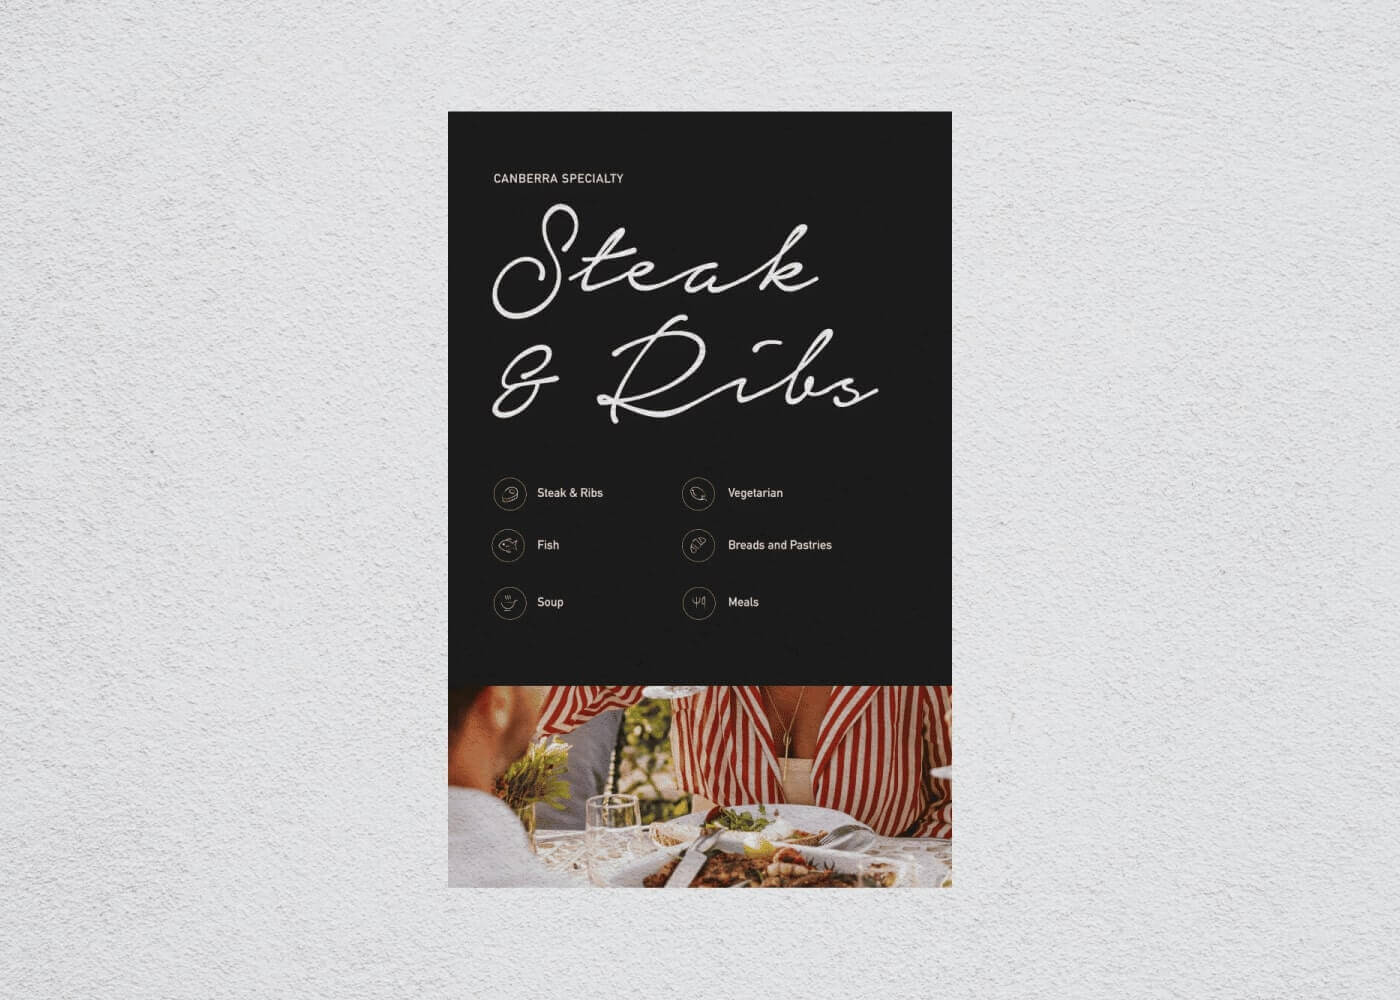 Canberra Specialty_steak and ribs_menu cover design